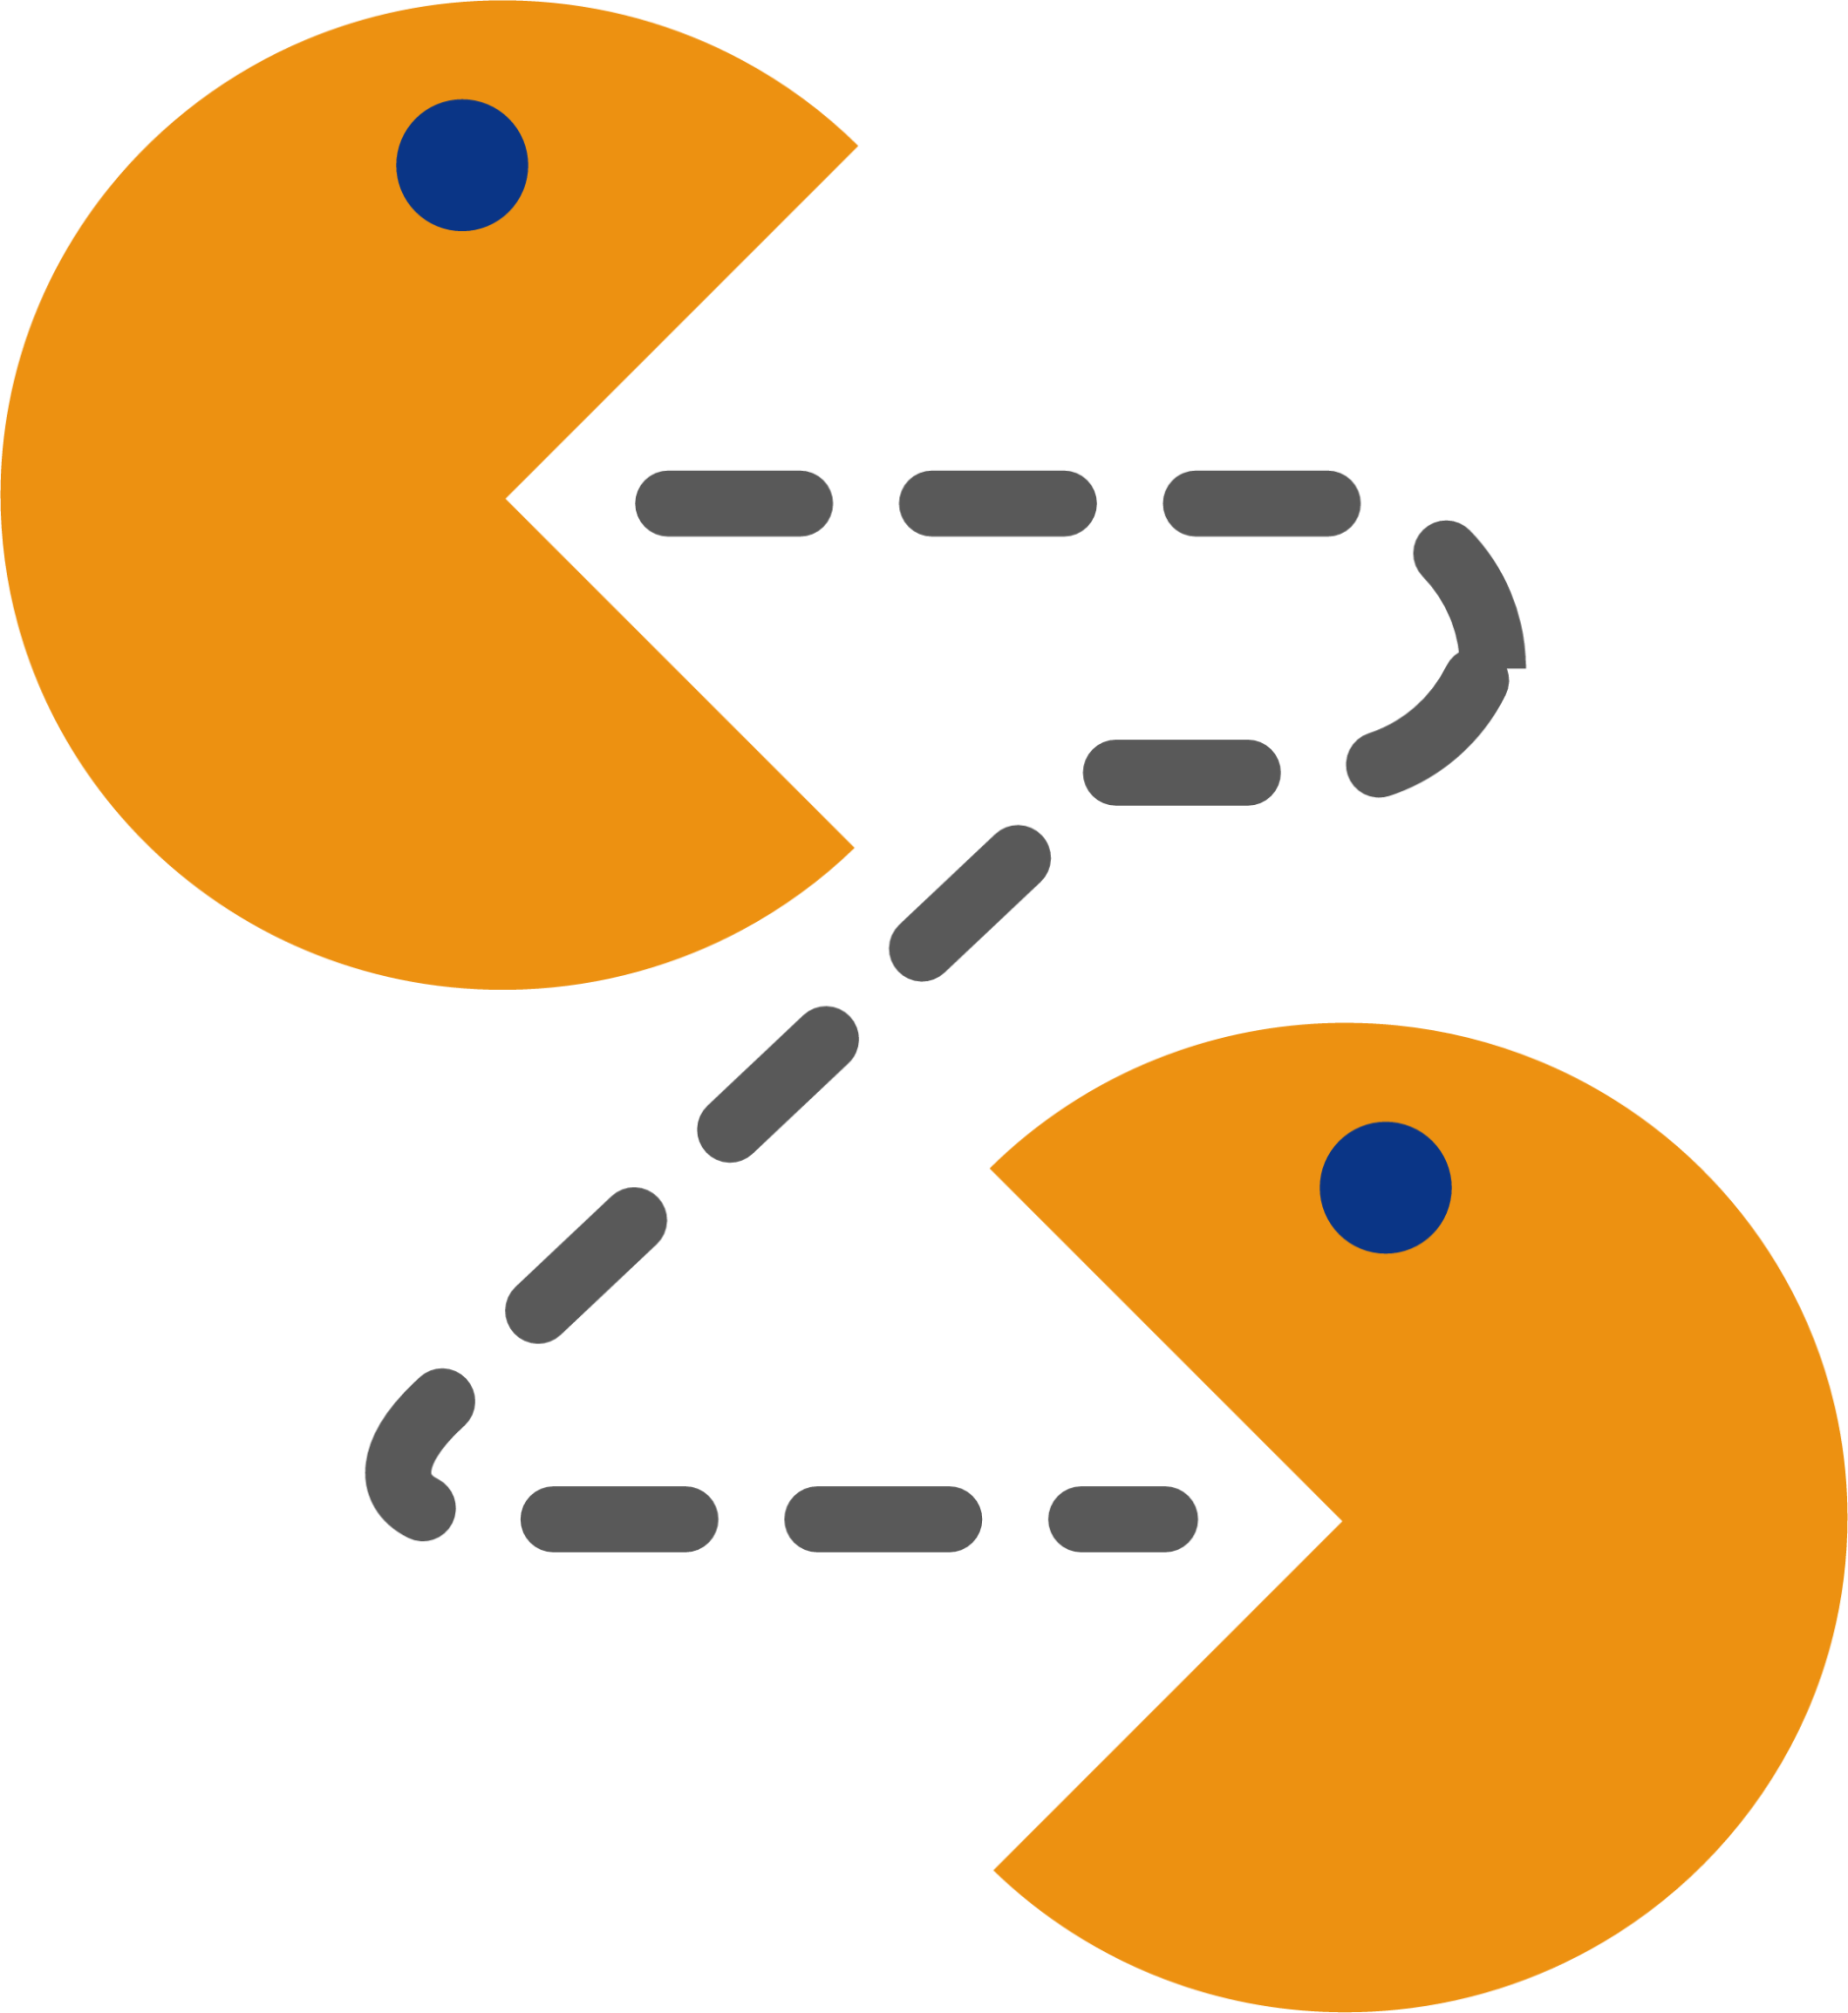 duel pacman icon